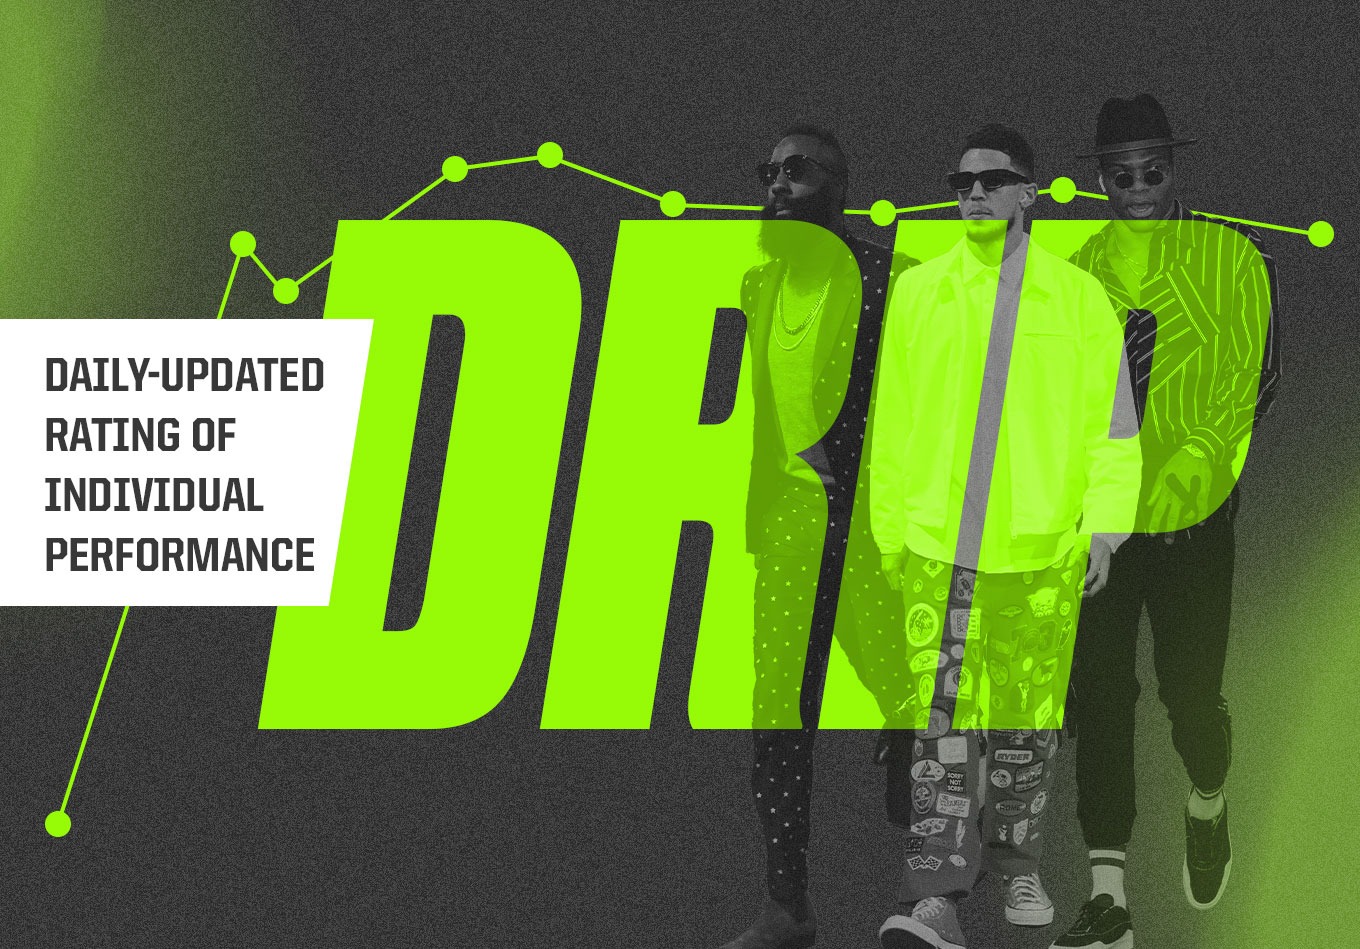 Introducing DRIP: Our Daily-Updated Rating of Individual Performance in the NBA